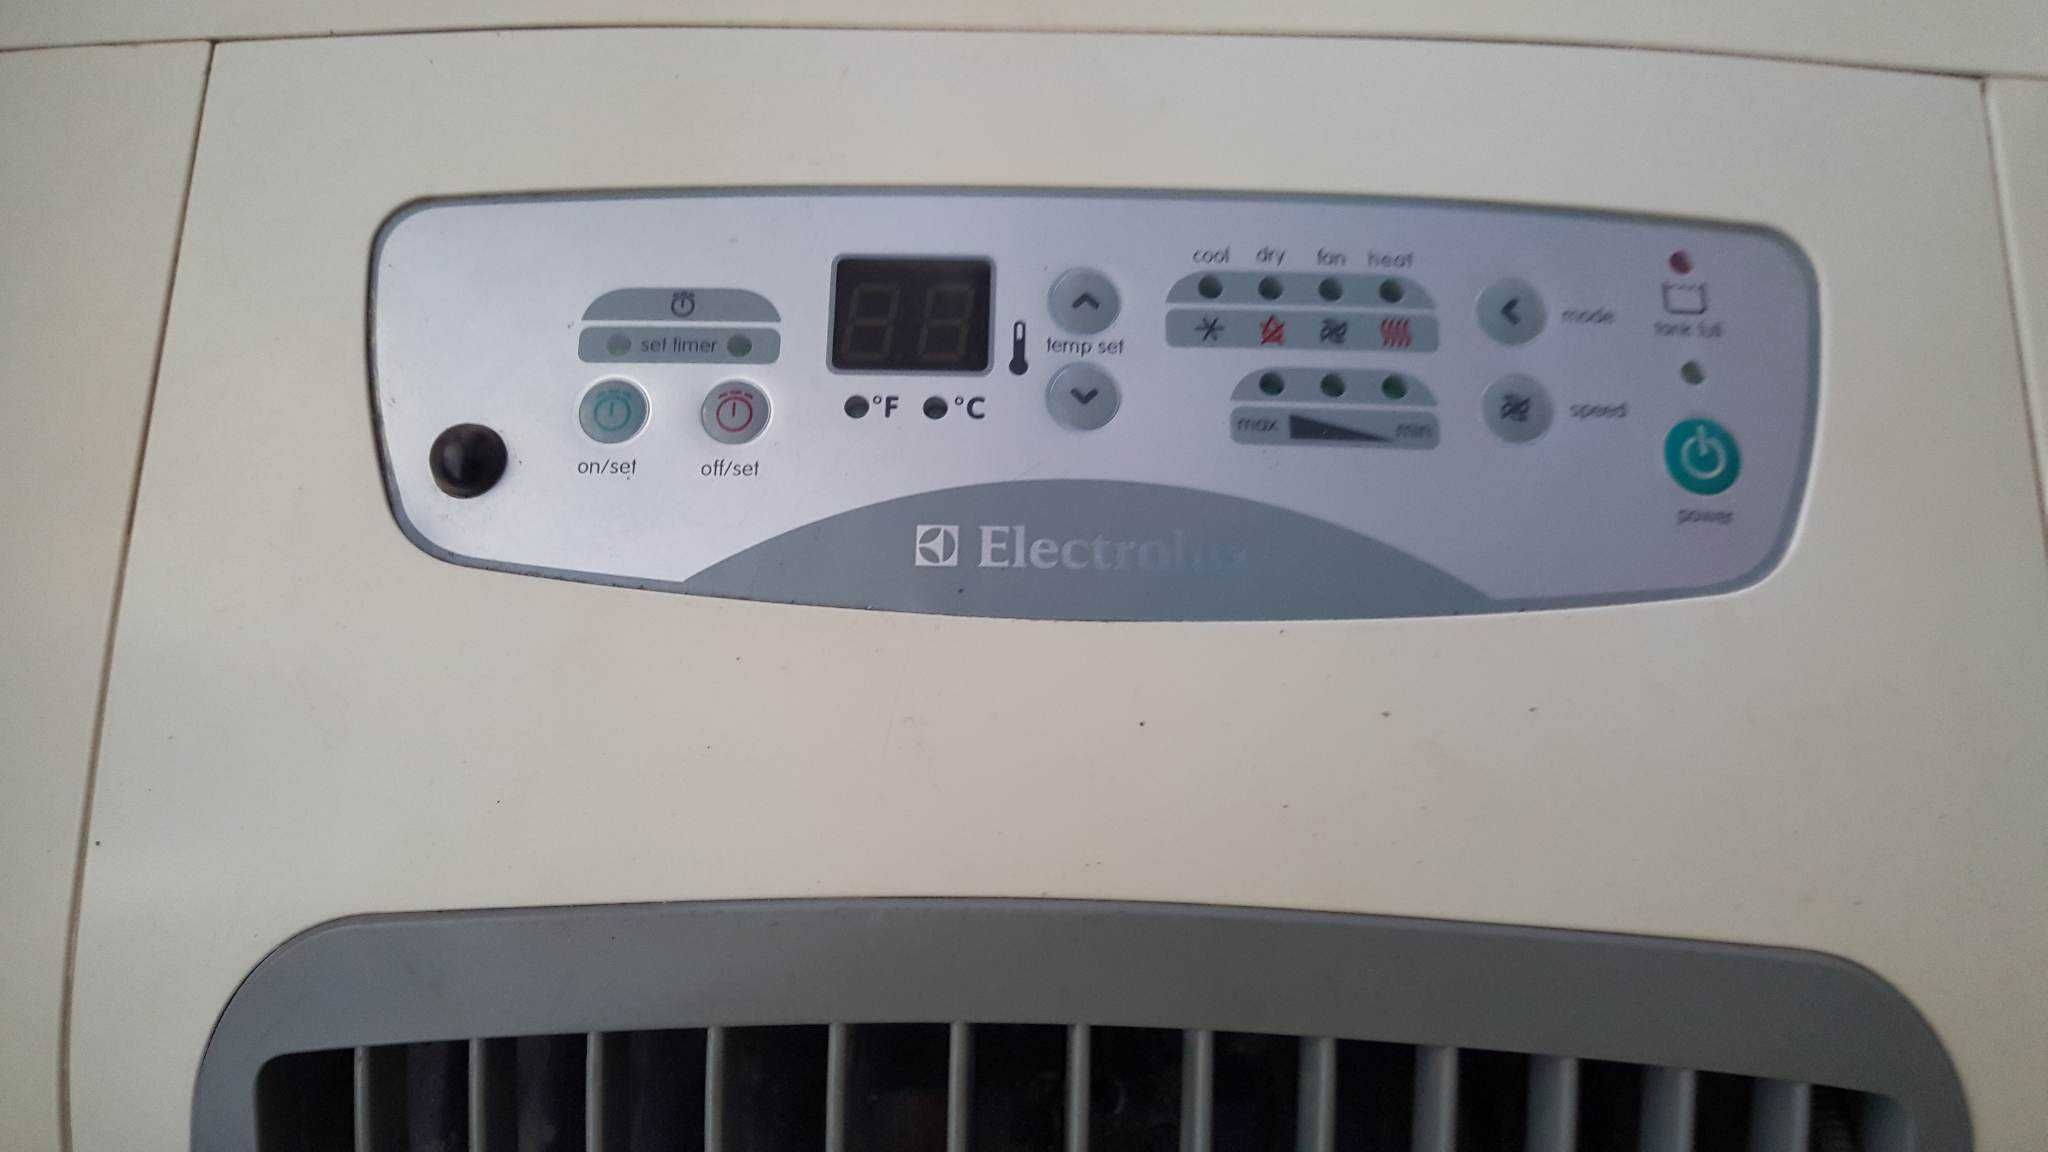 Aer conditionat Mobil Electrolux